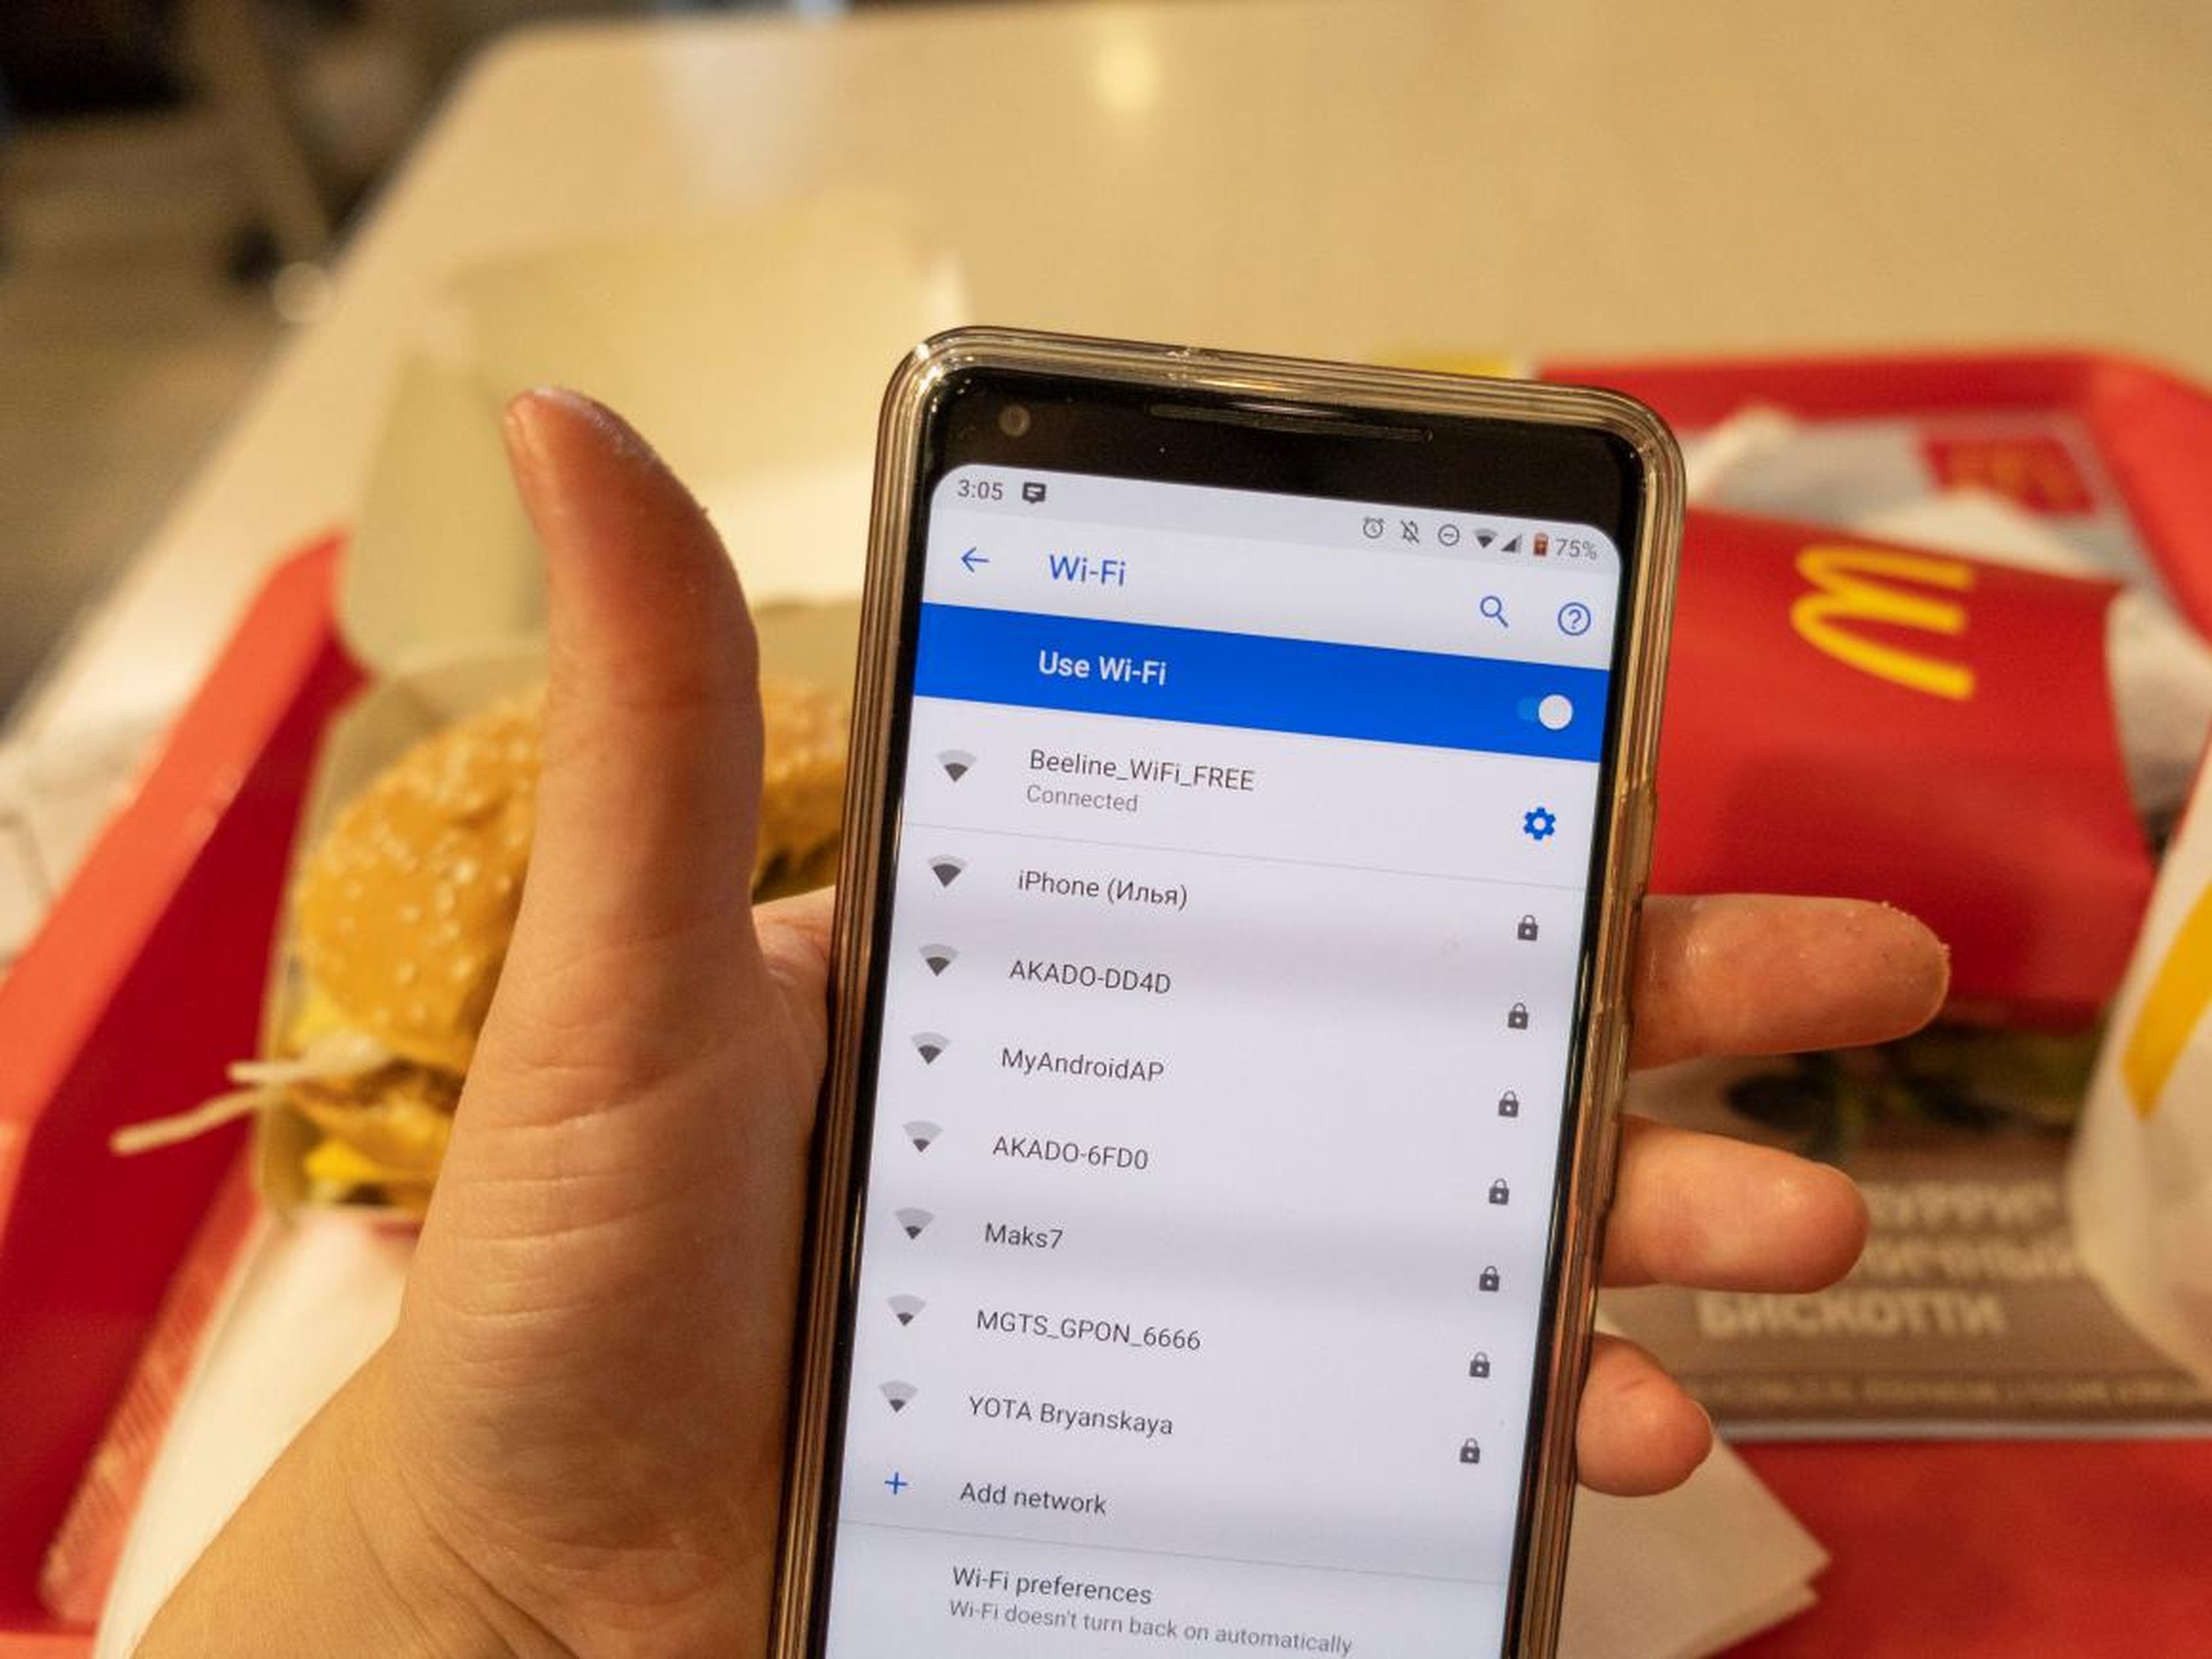 Like in the US, the Moscow McDonald's offered free WiFi.